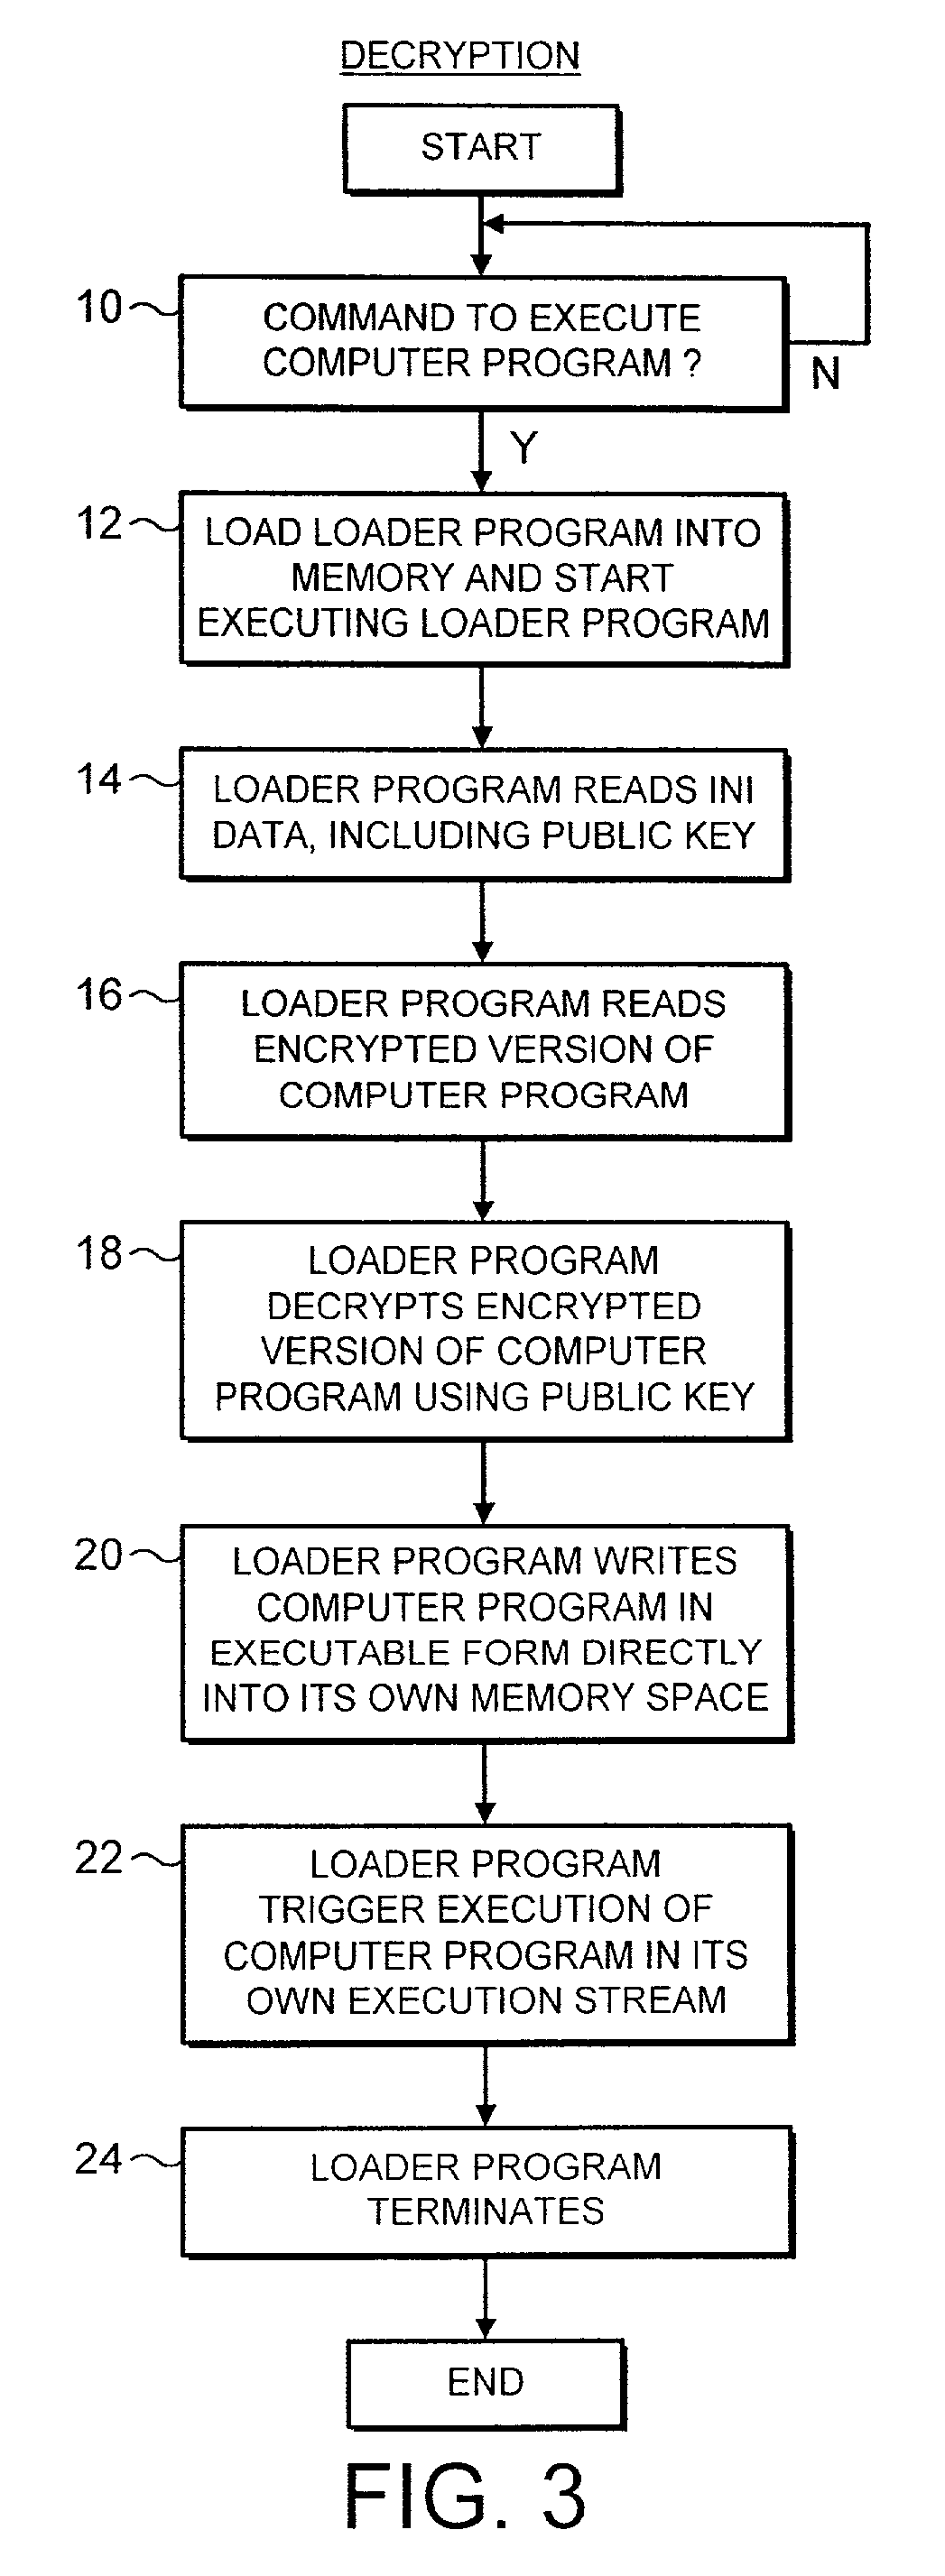 Initiating execution of a computer program from an encrypted version of a computer program